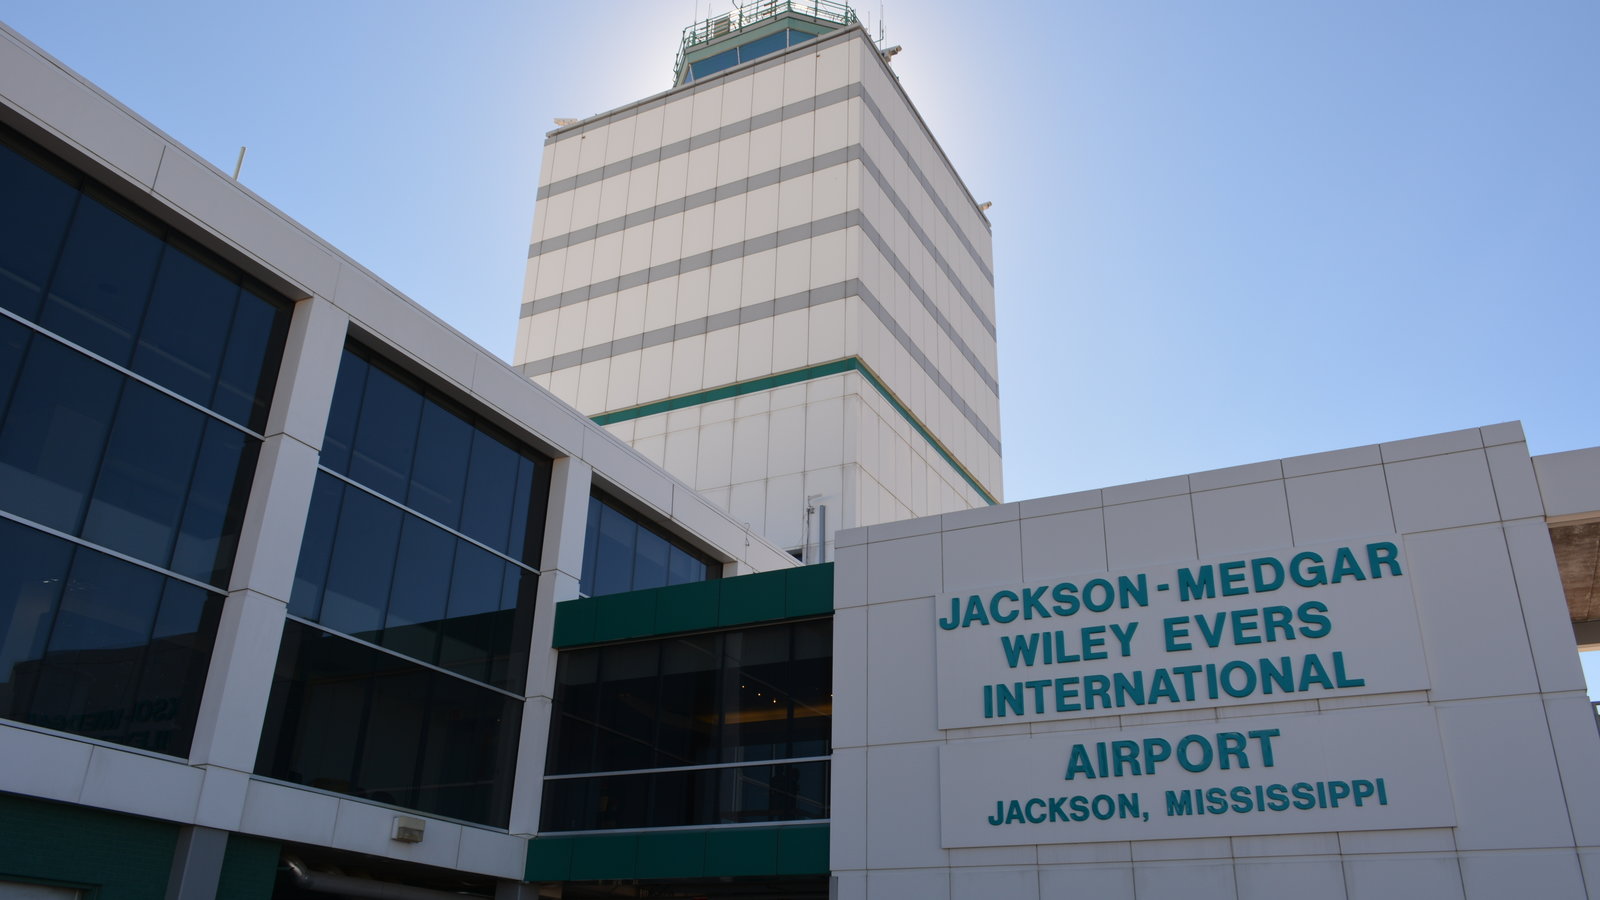 Jackson Municipal Airport Authority Secures $22 Million Funding for Infrastructure Projects at Jackson-Medgar Wiley Evers International Airport